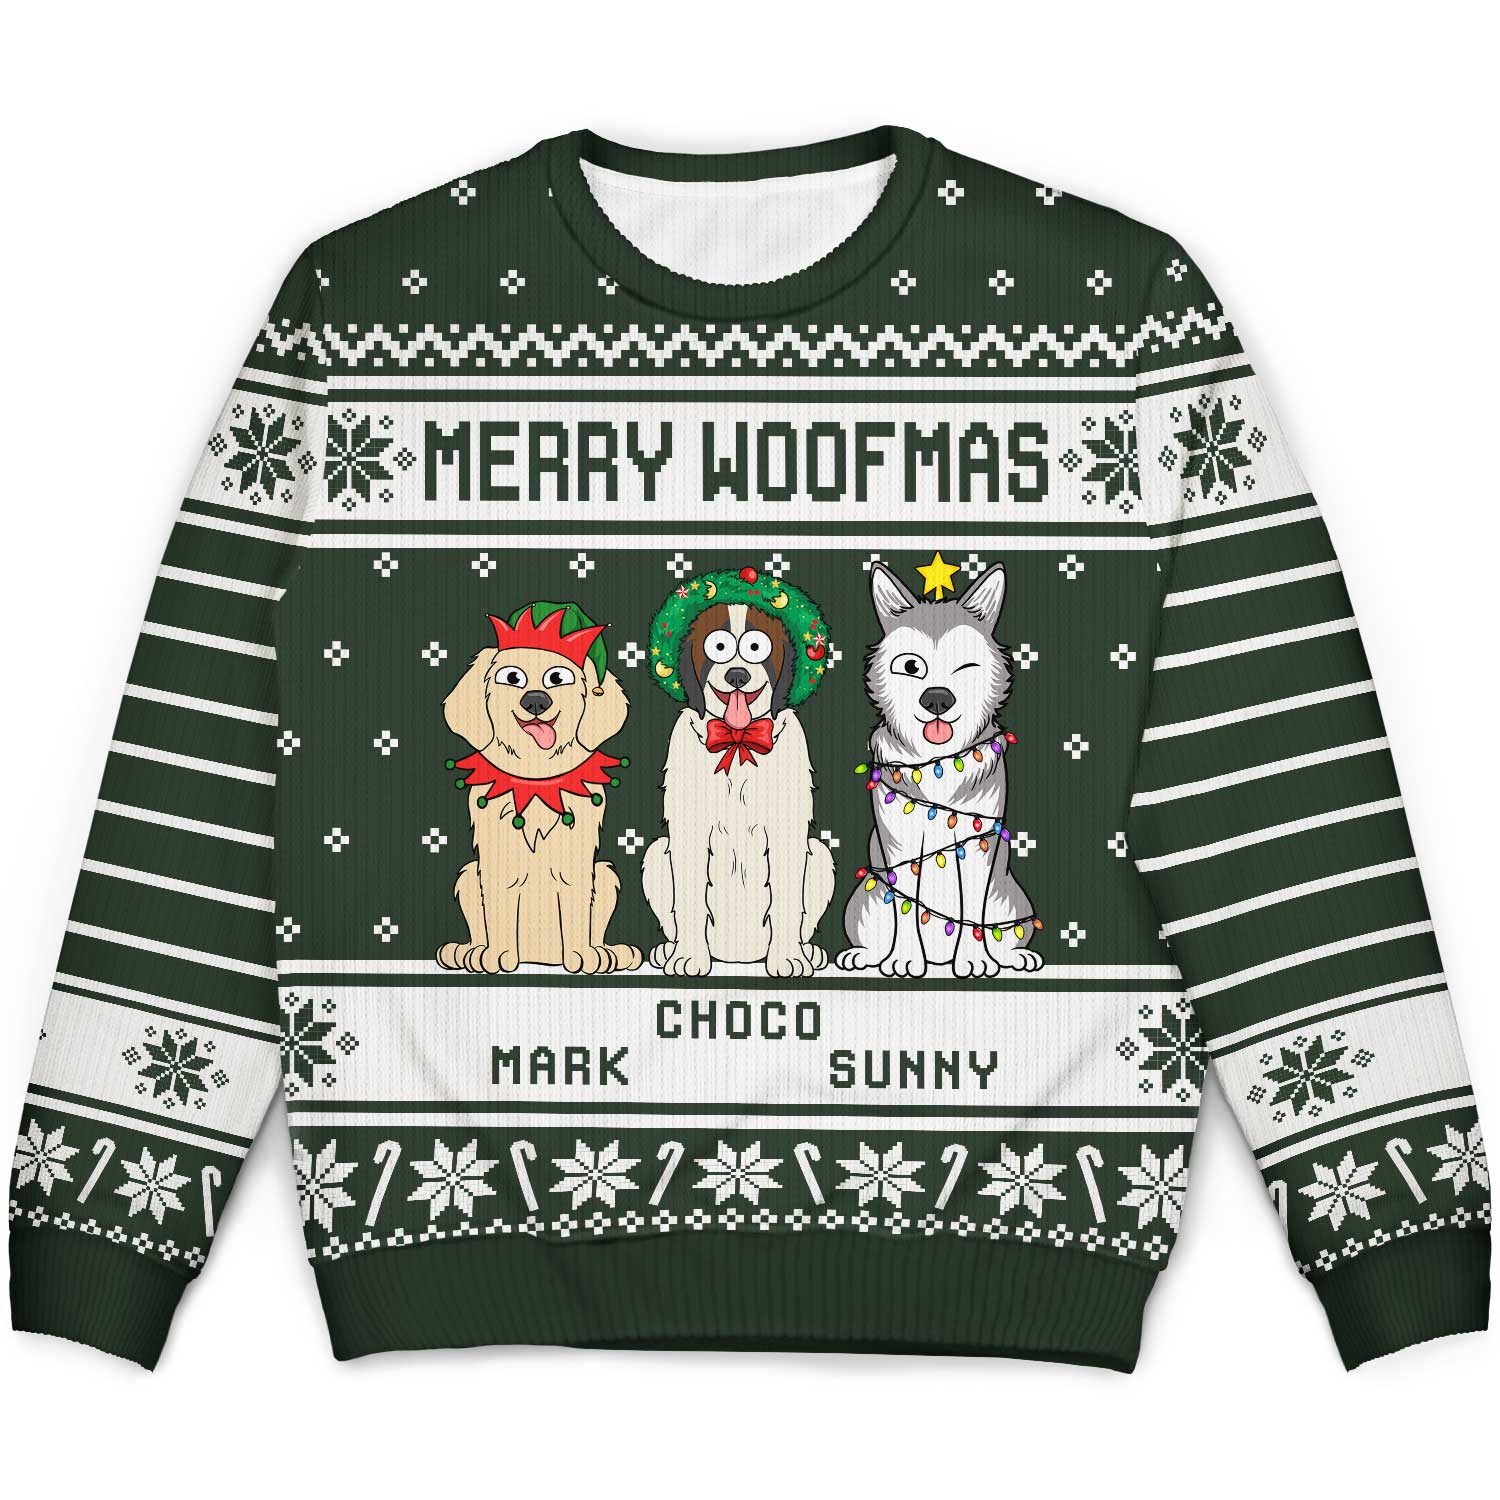 Merry Woofmas - Christmas Gift For Dog Lovers - Personalized Unisex Ugly Sweater